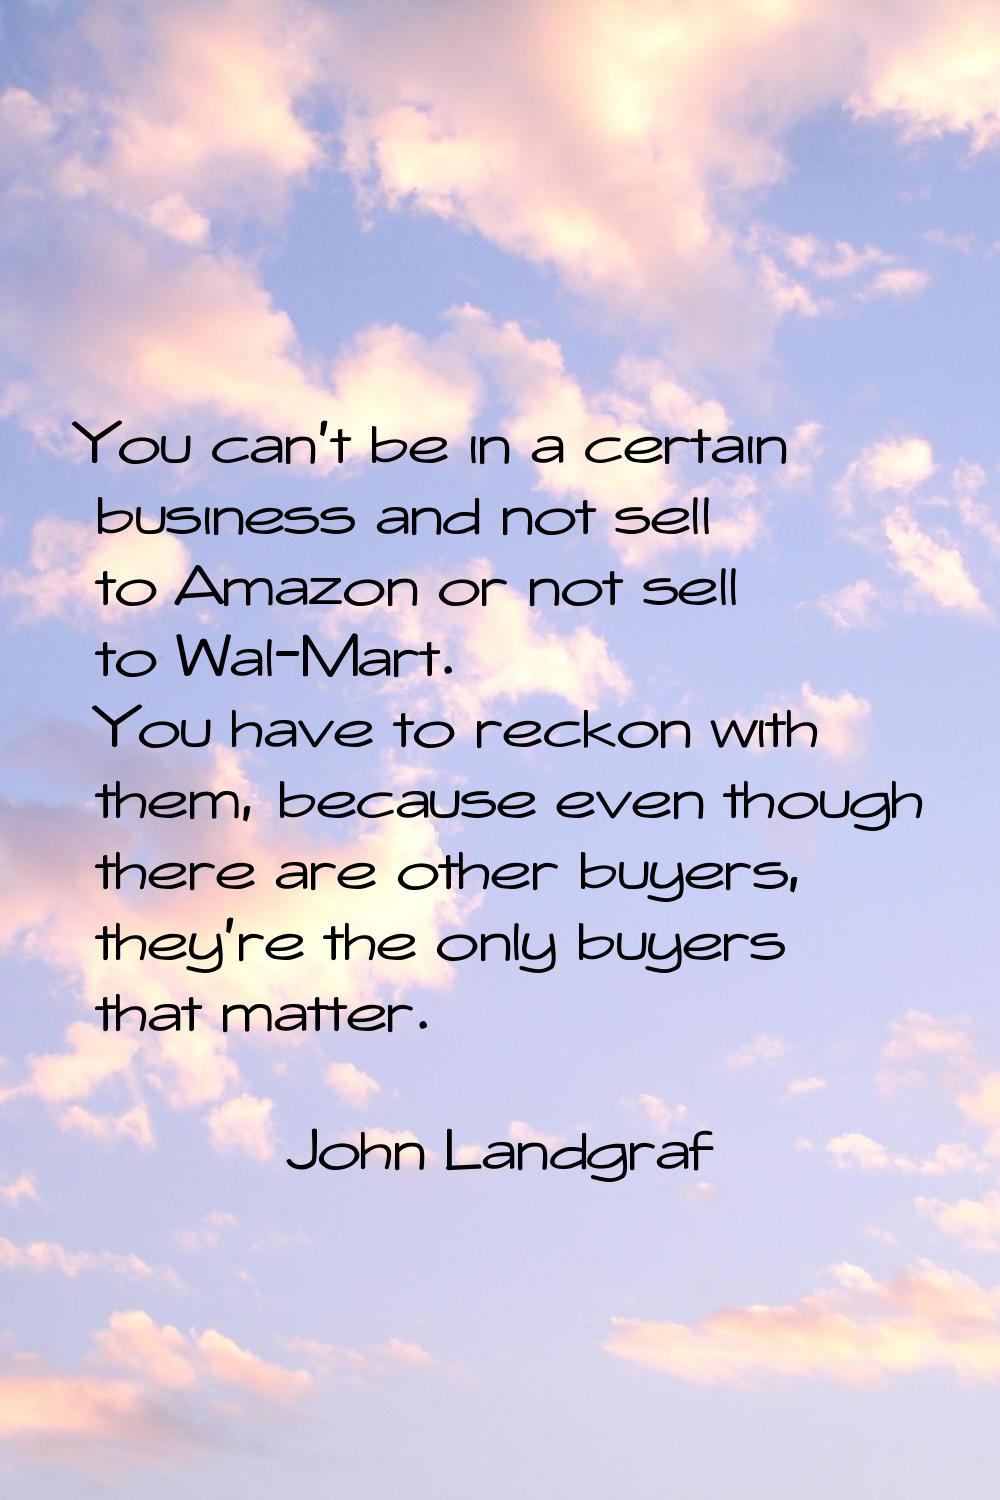 You can't be in a certain business and not sell to Amazon or not sell to Wal-Mart. You have to reck